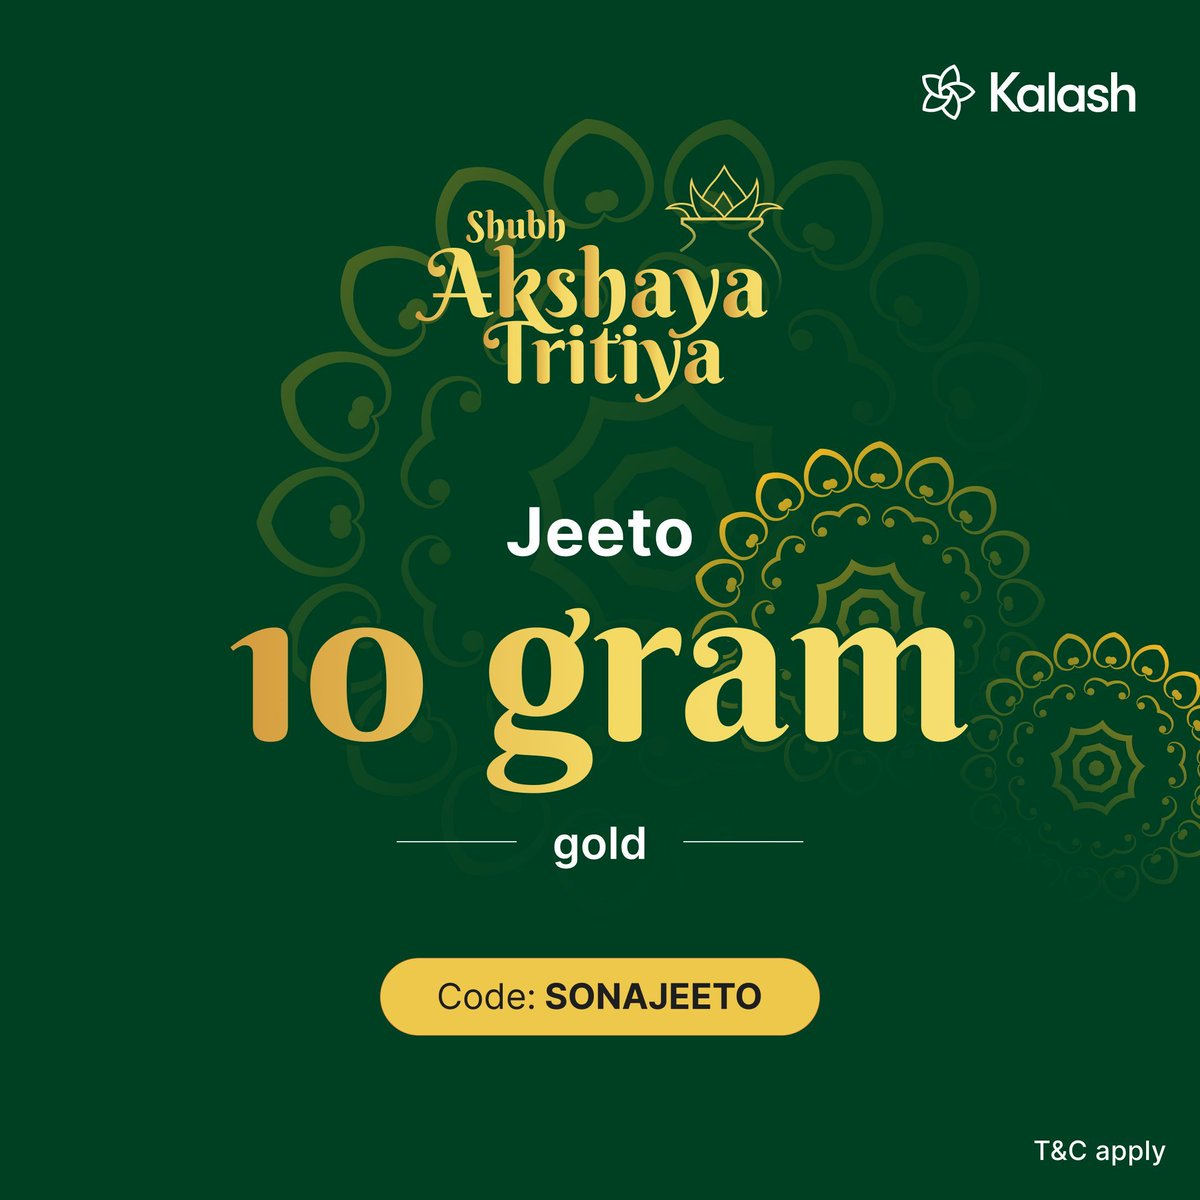 This Akshaya Tritiya, we’re giving away a MEGA 10 grams of gold to our users. Don’t miss out on this shubh avsar, download the app today: buff.ly/3wgK85m